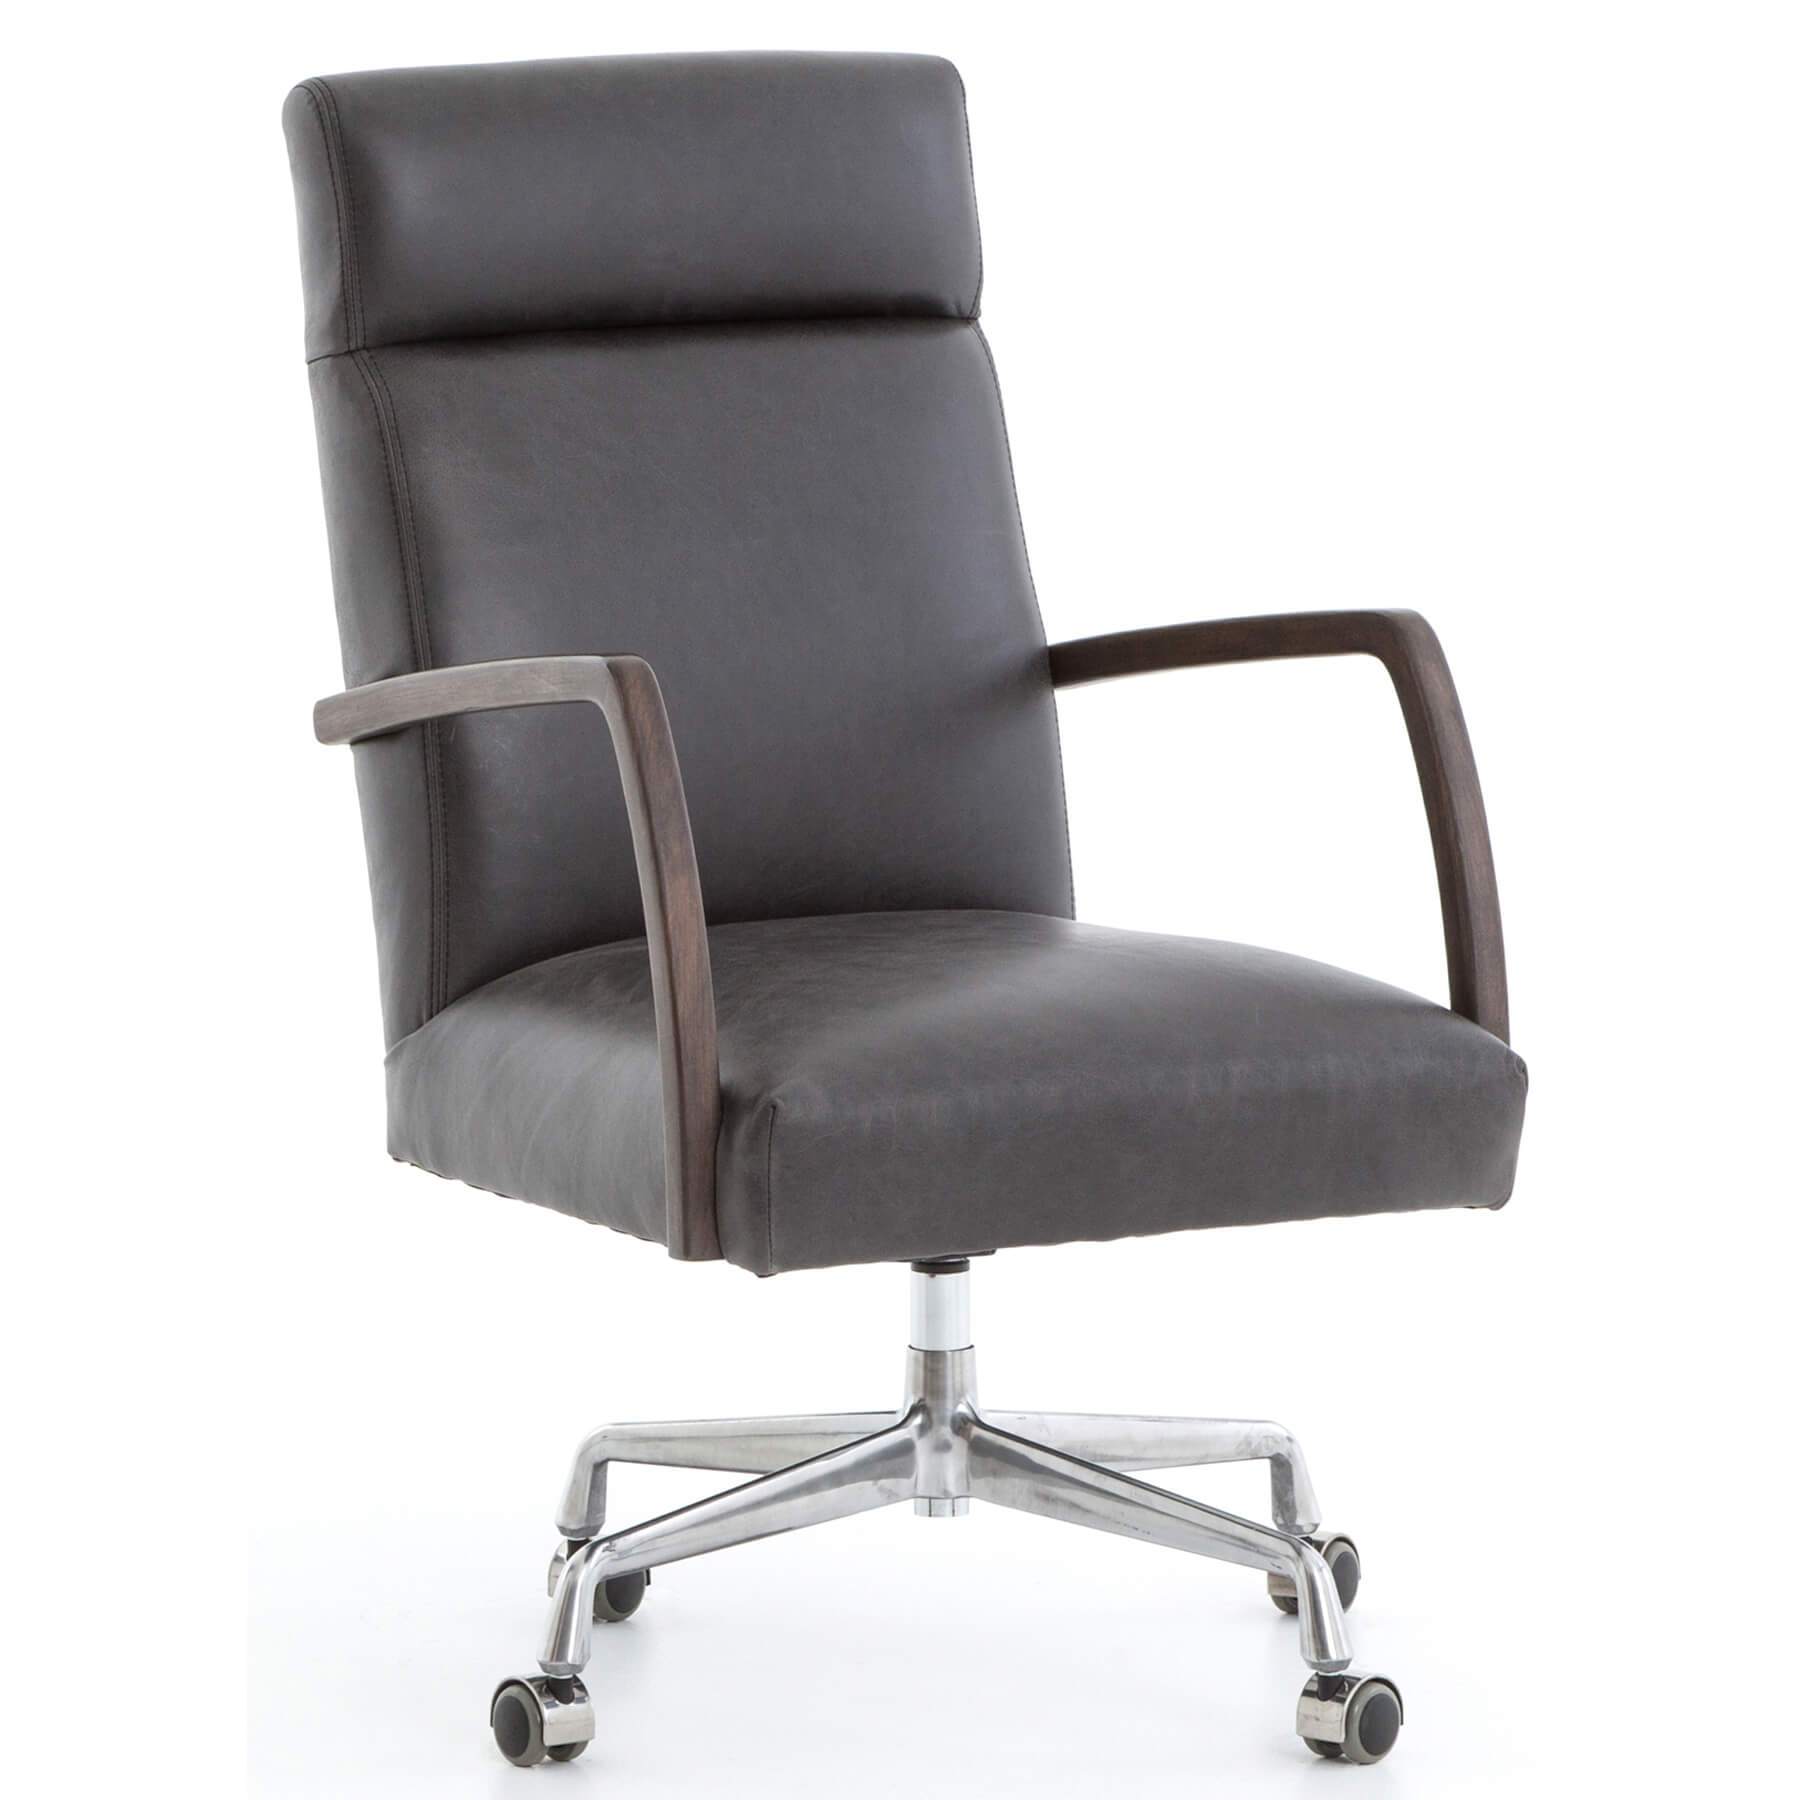 Image of Bryson Leather Desk Chair, Chaps Ebony